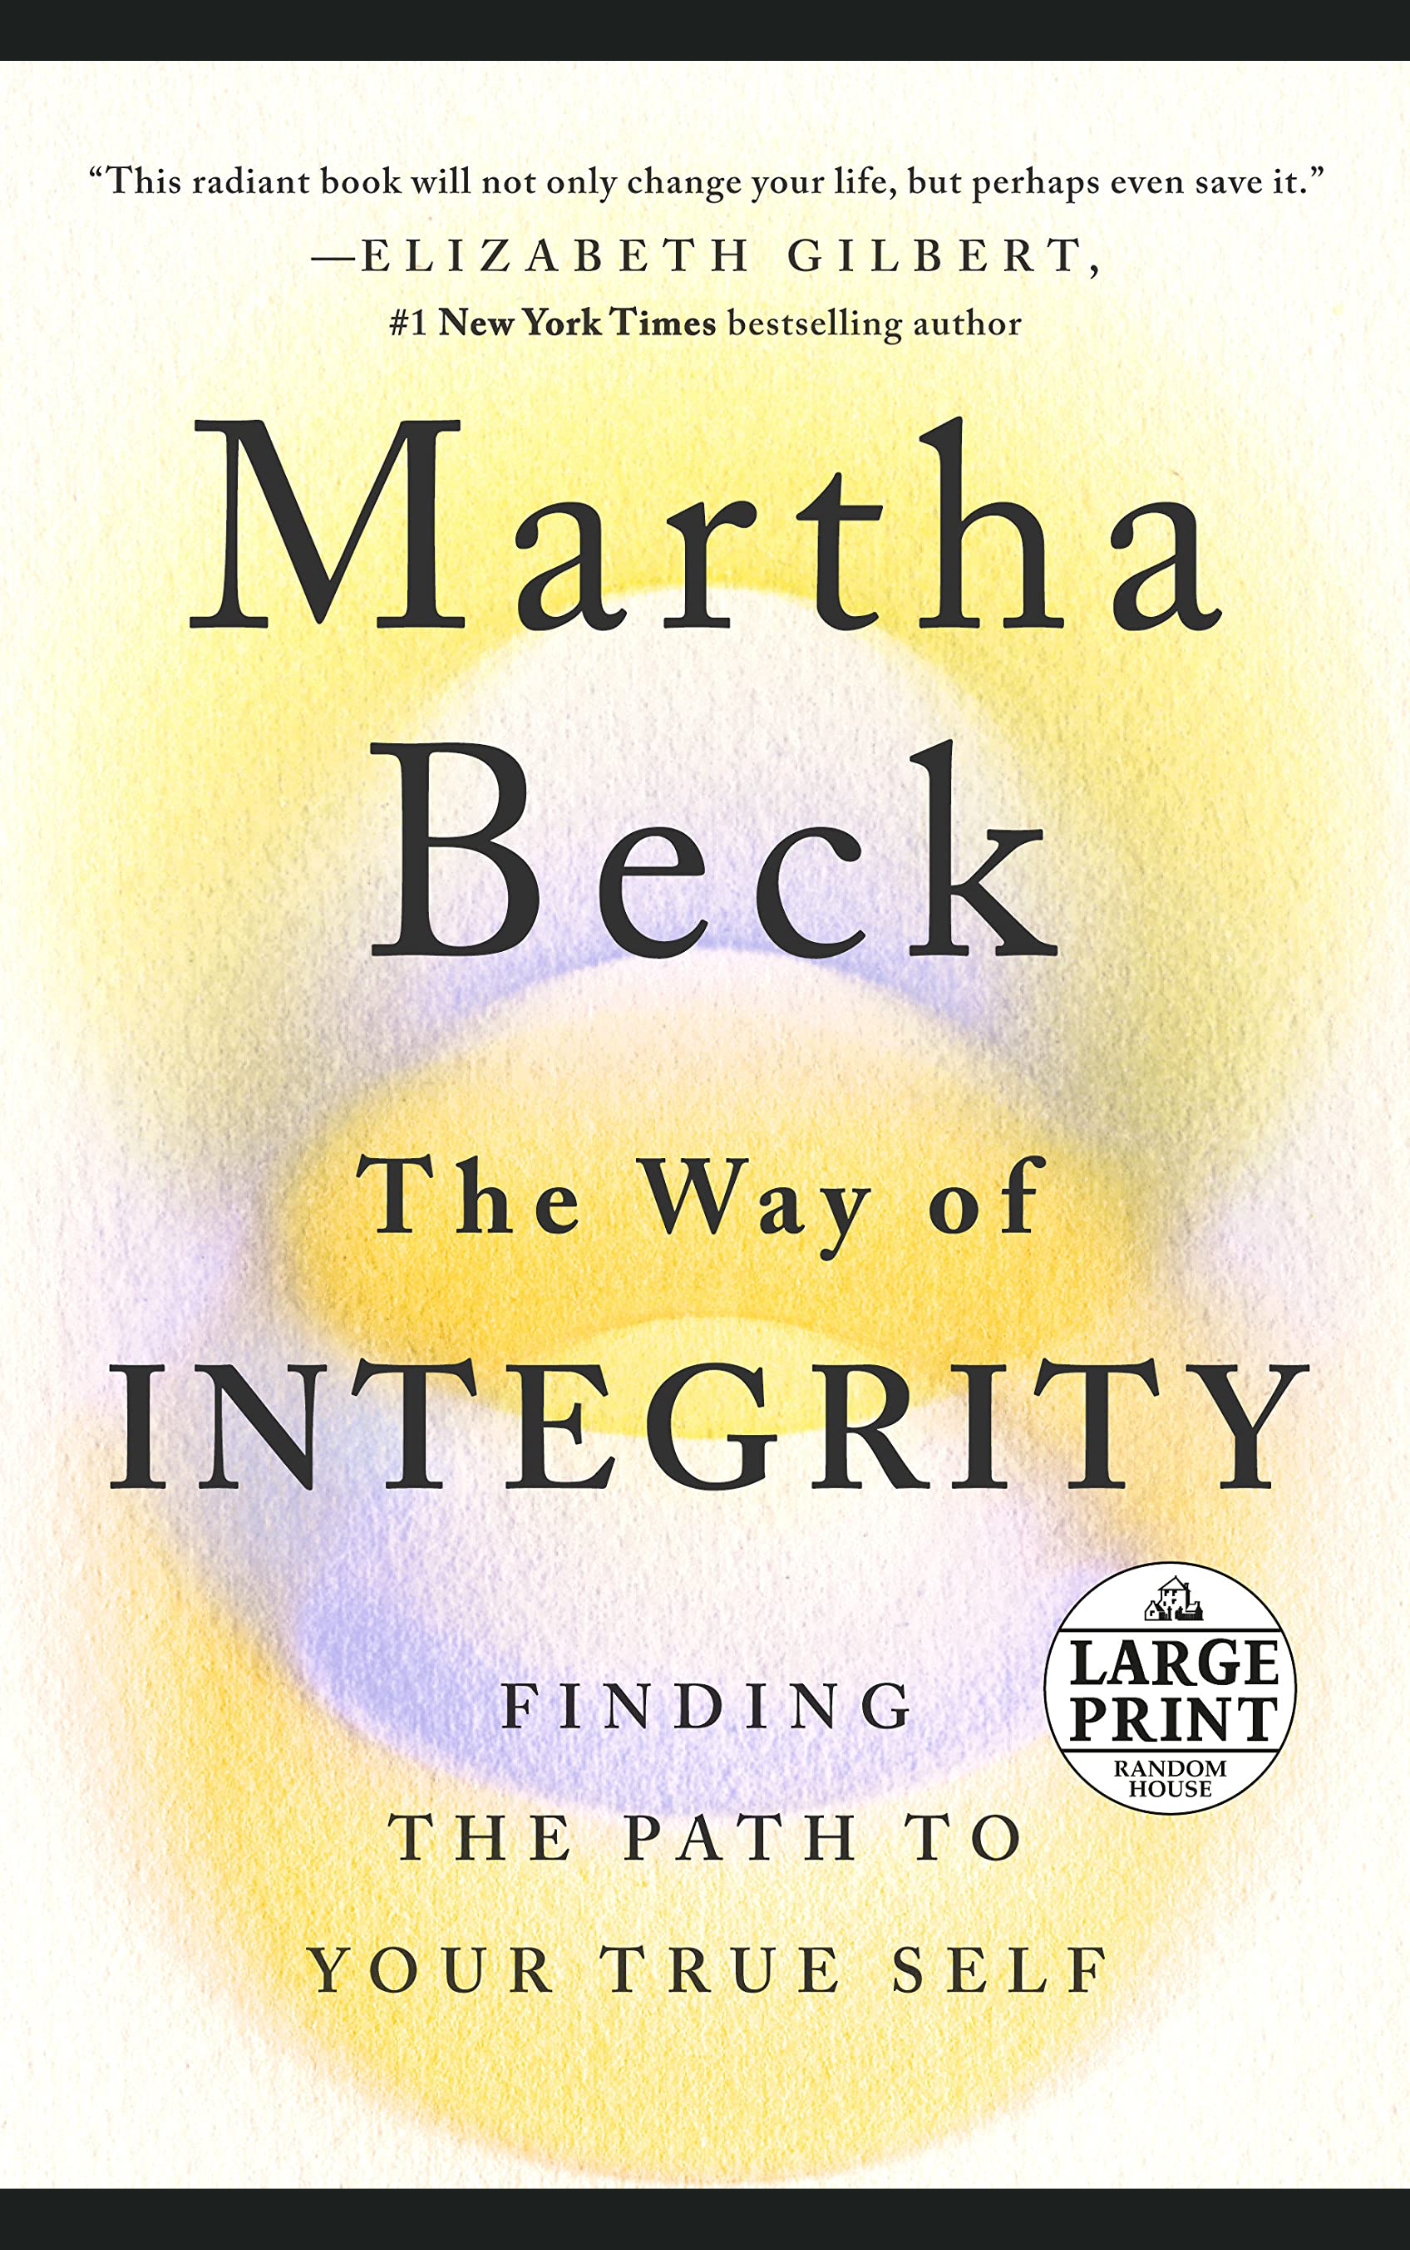 THE WAY OF INTEGRITY BY MARTHA N. BECK